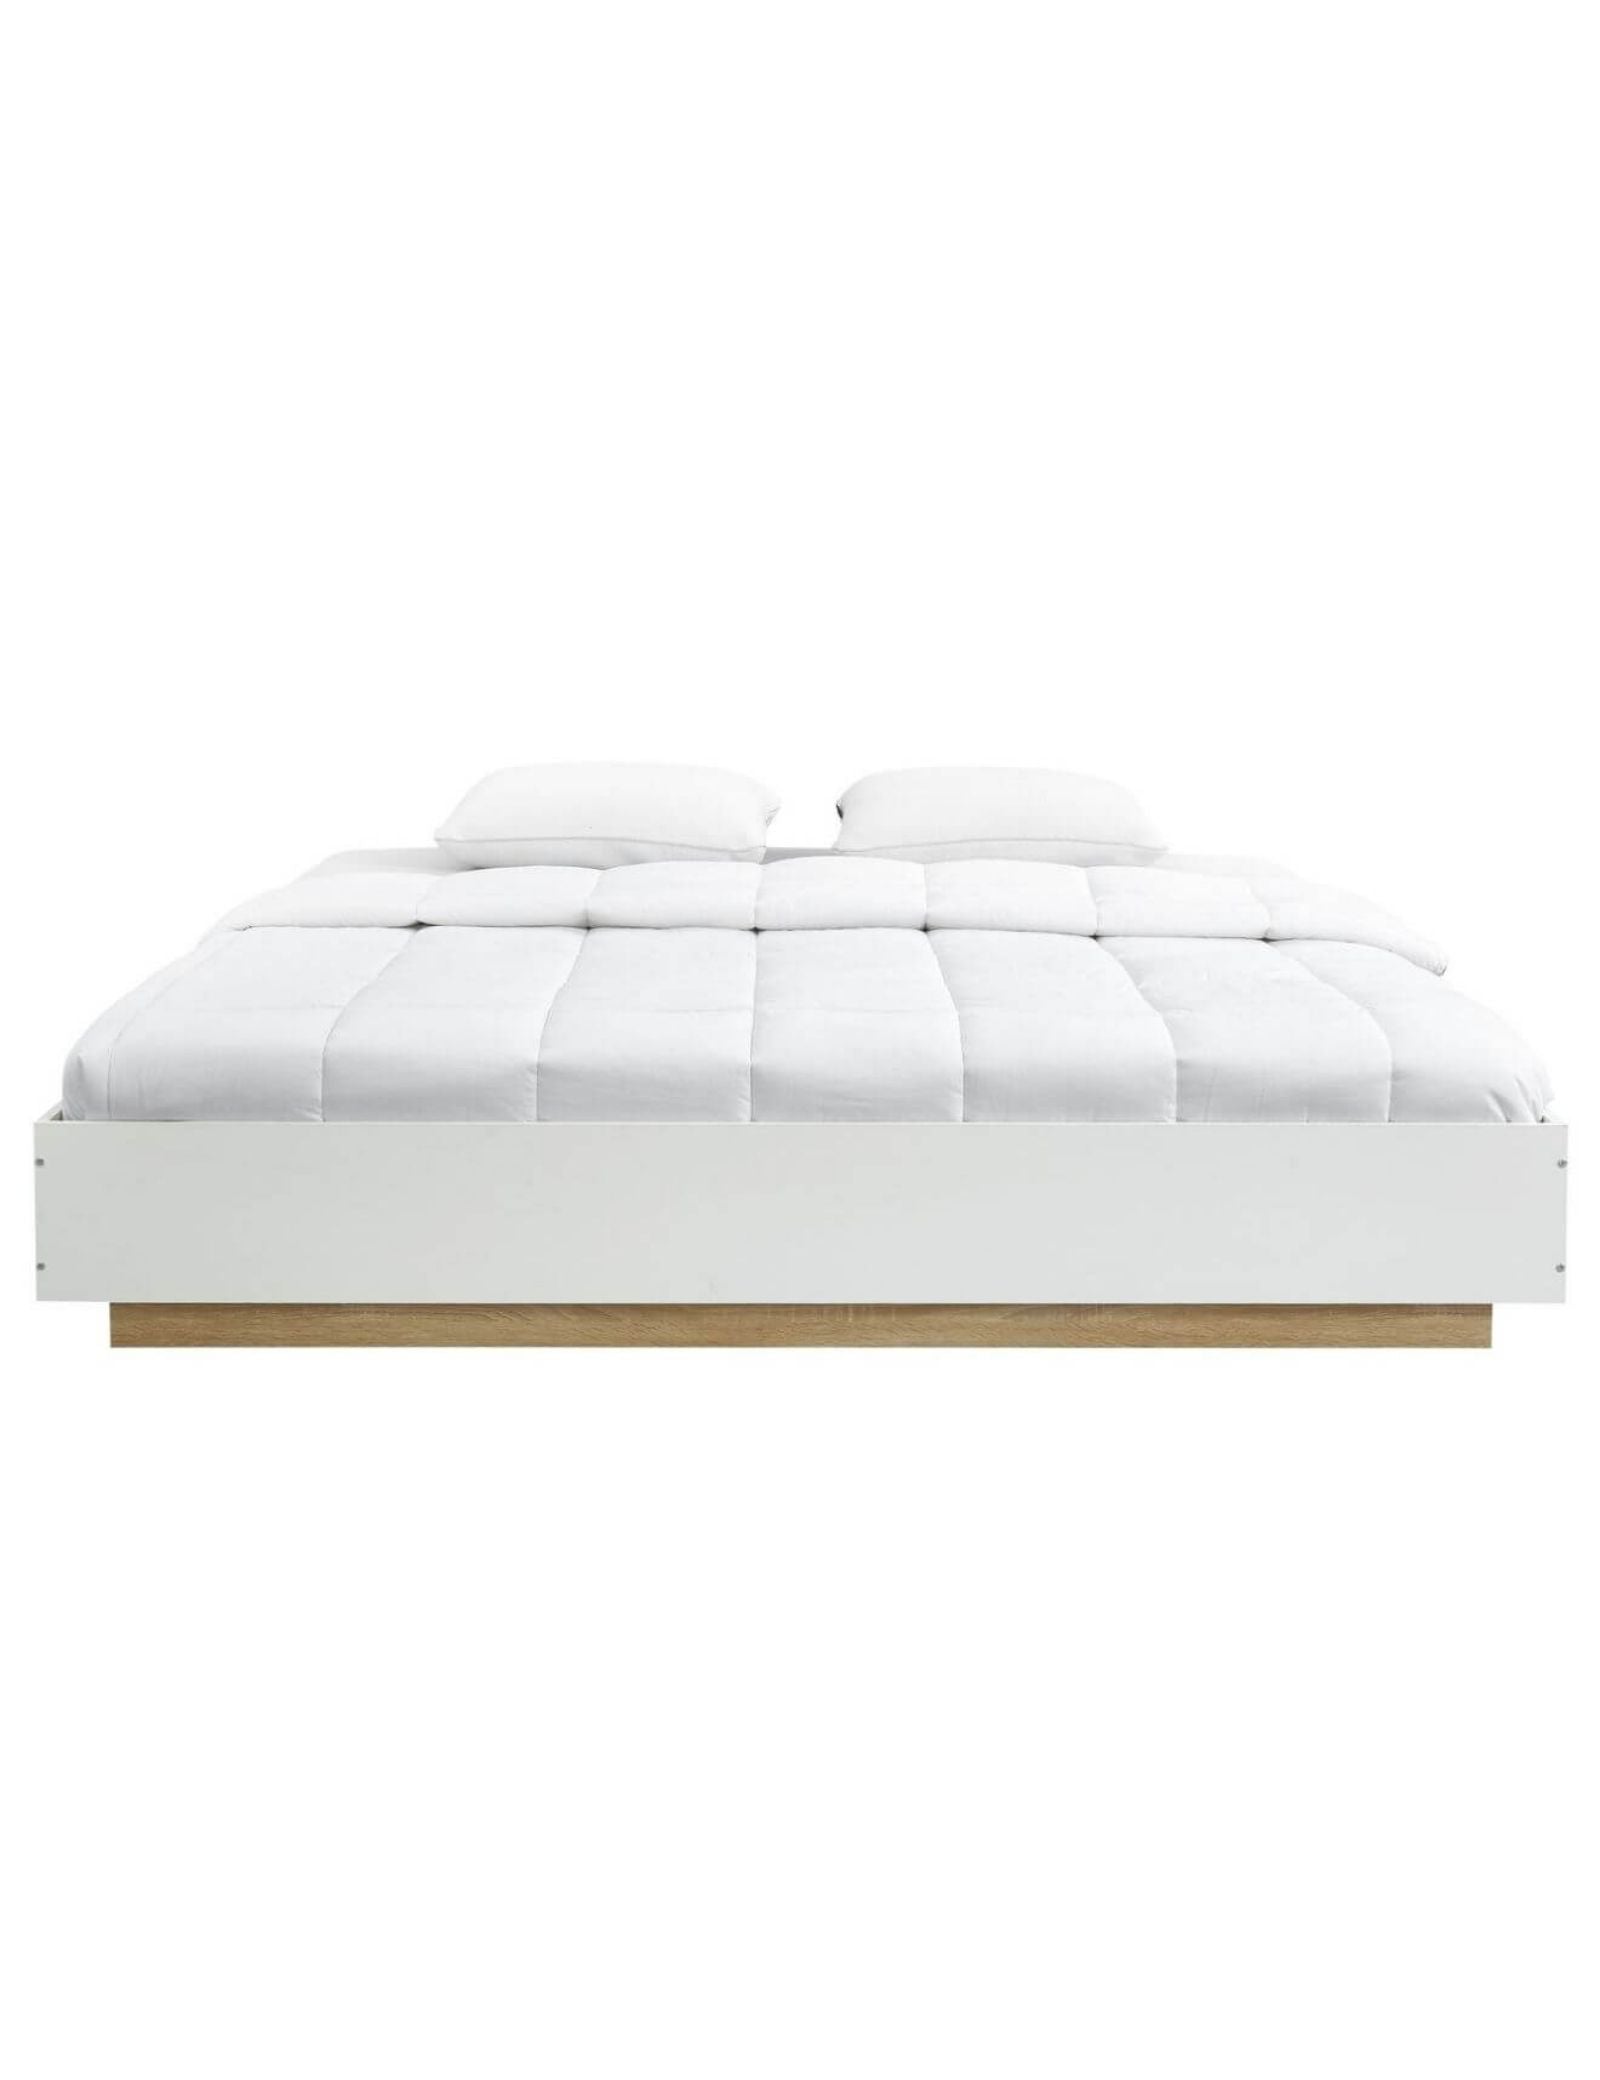 Aiden Industrial Contemporary White Oak Bed Base Bed Frame - ozily